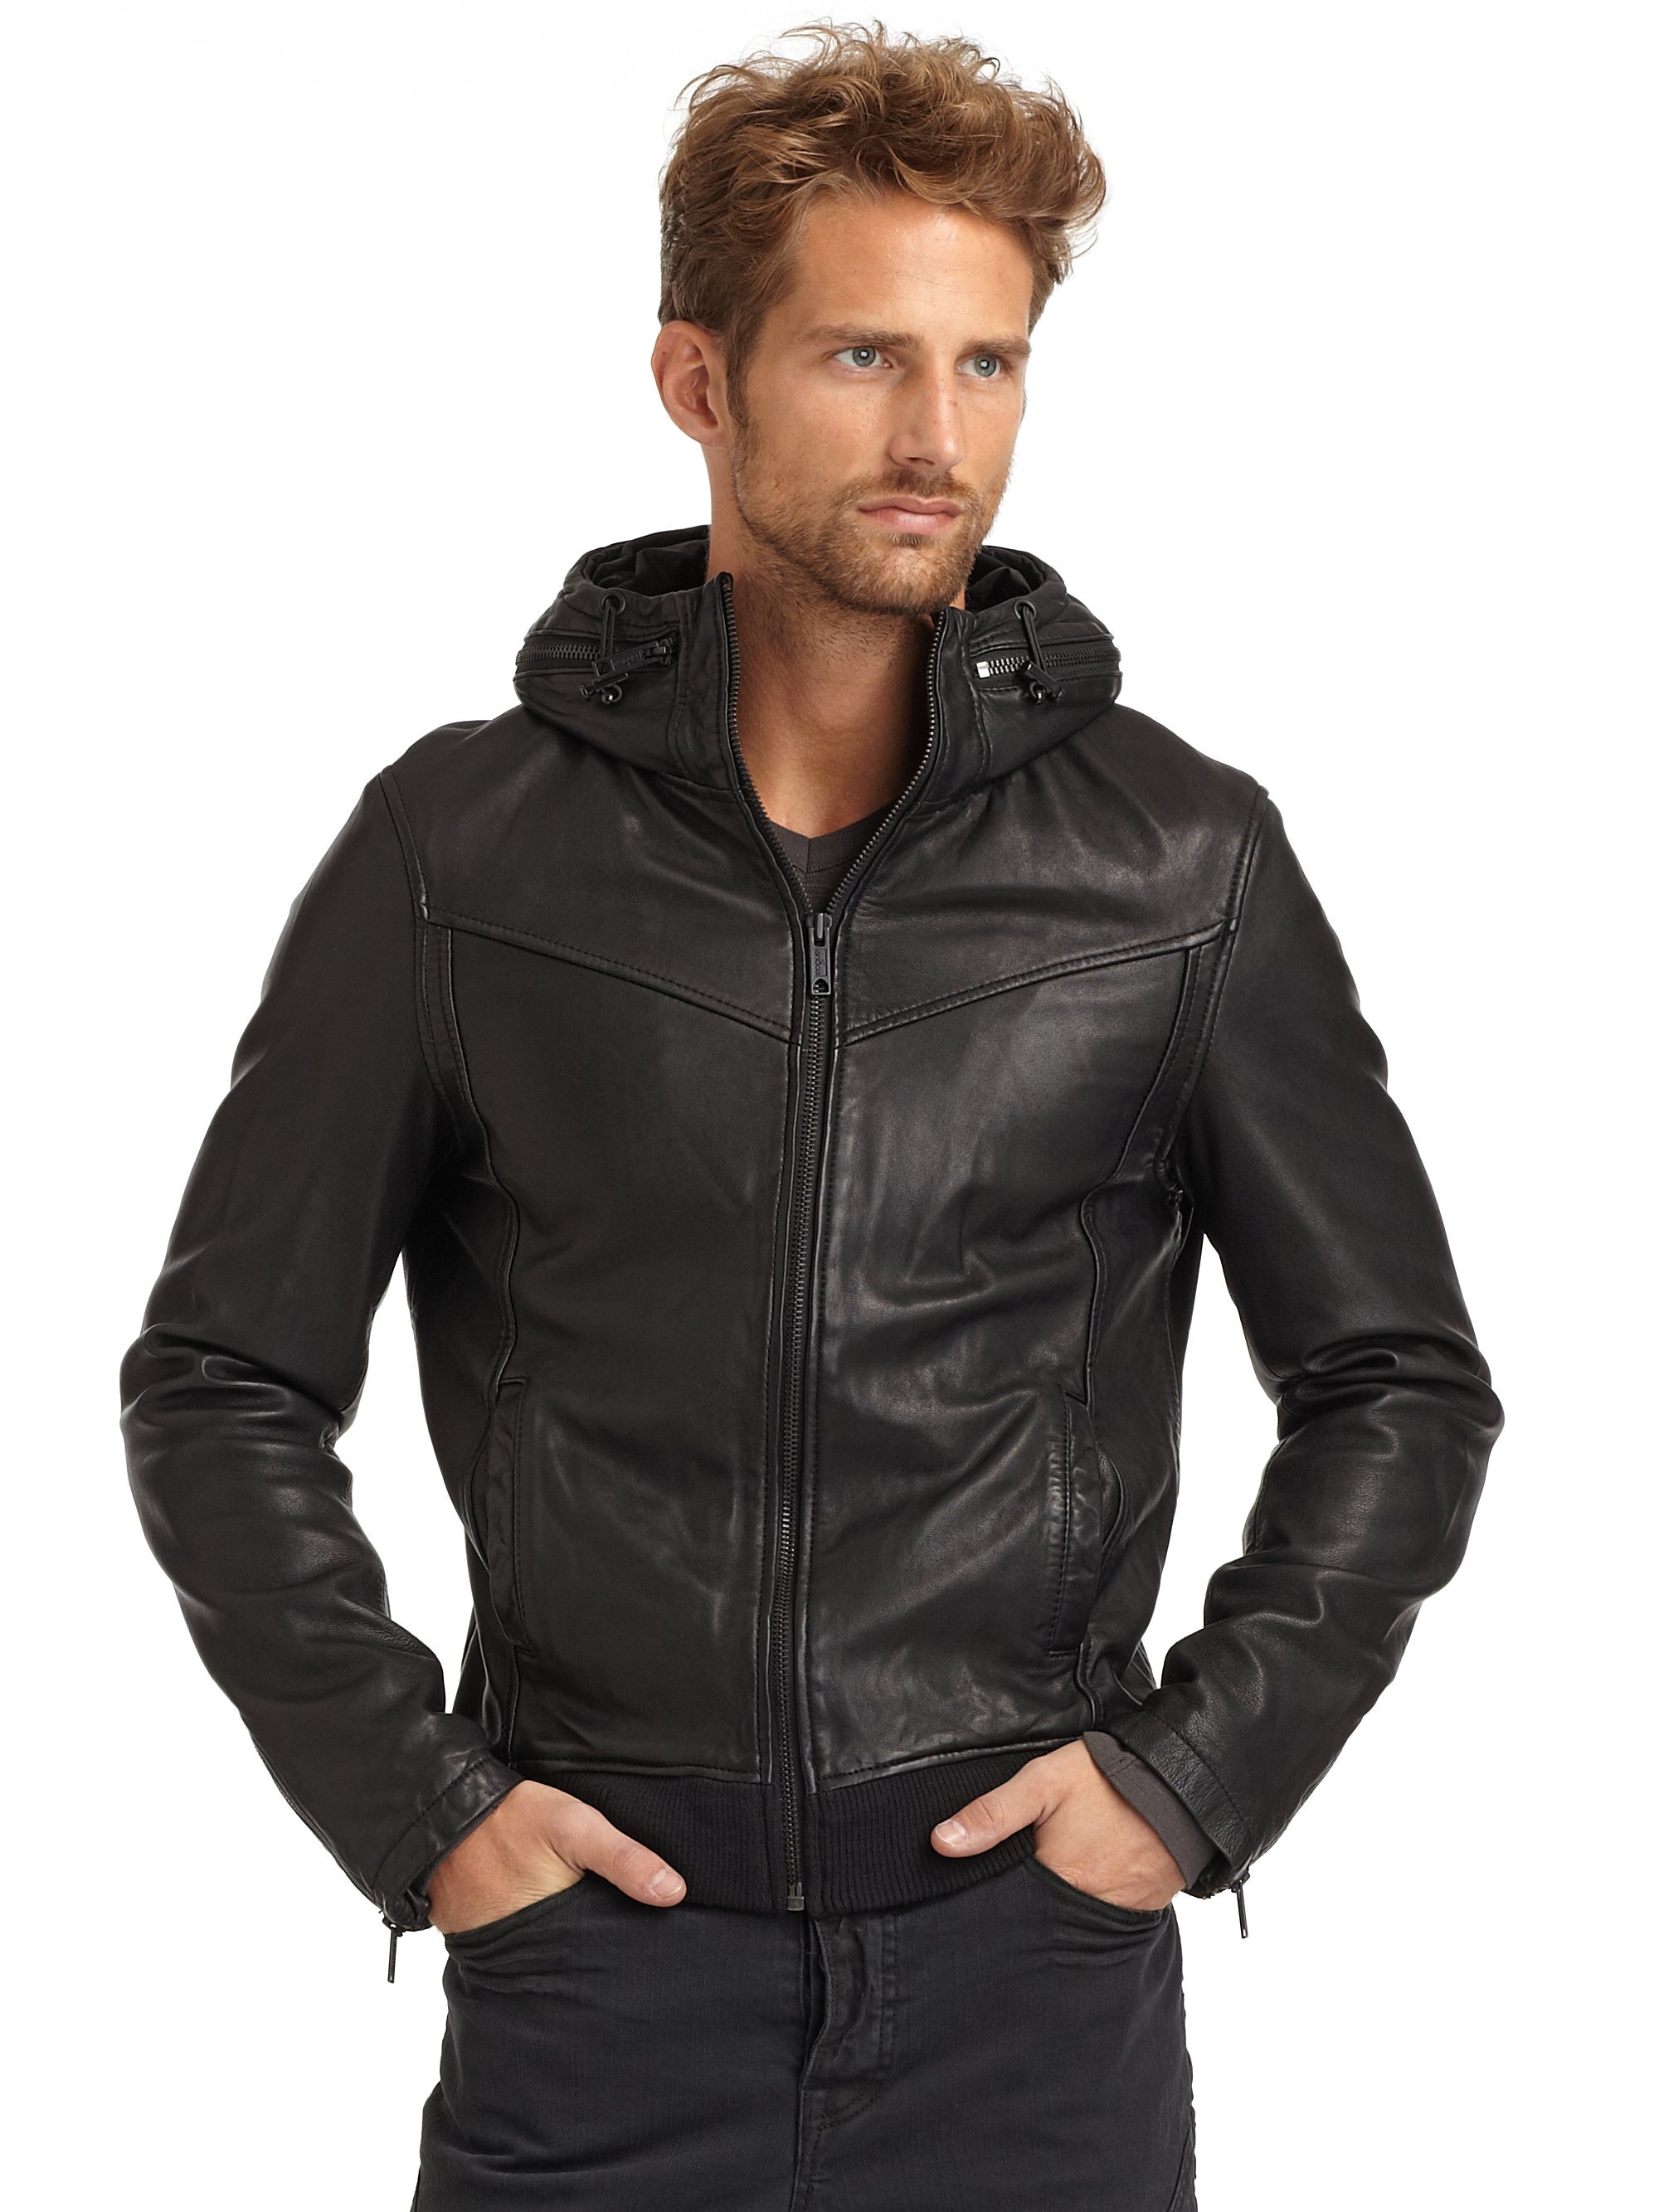 Lyst - Rogue Hooded Bomber Leather Jacket in Black for Men